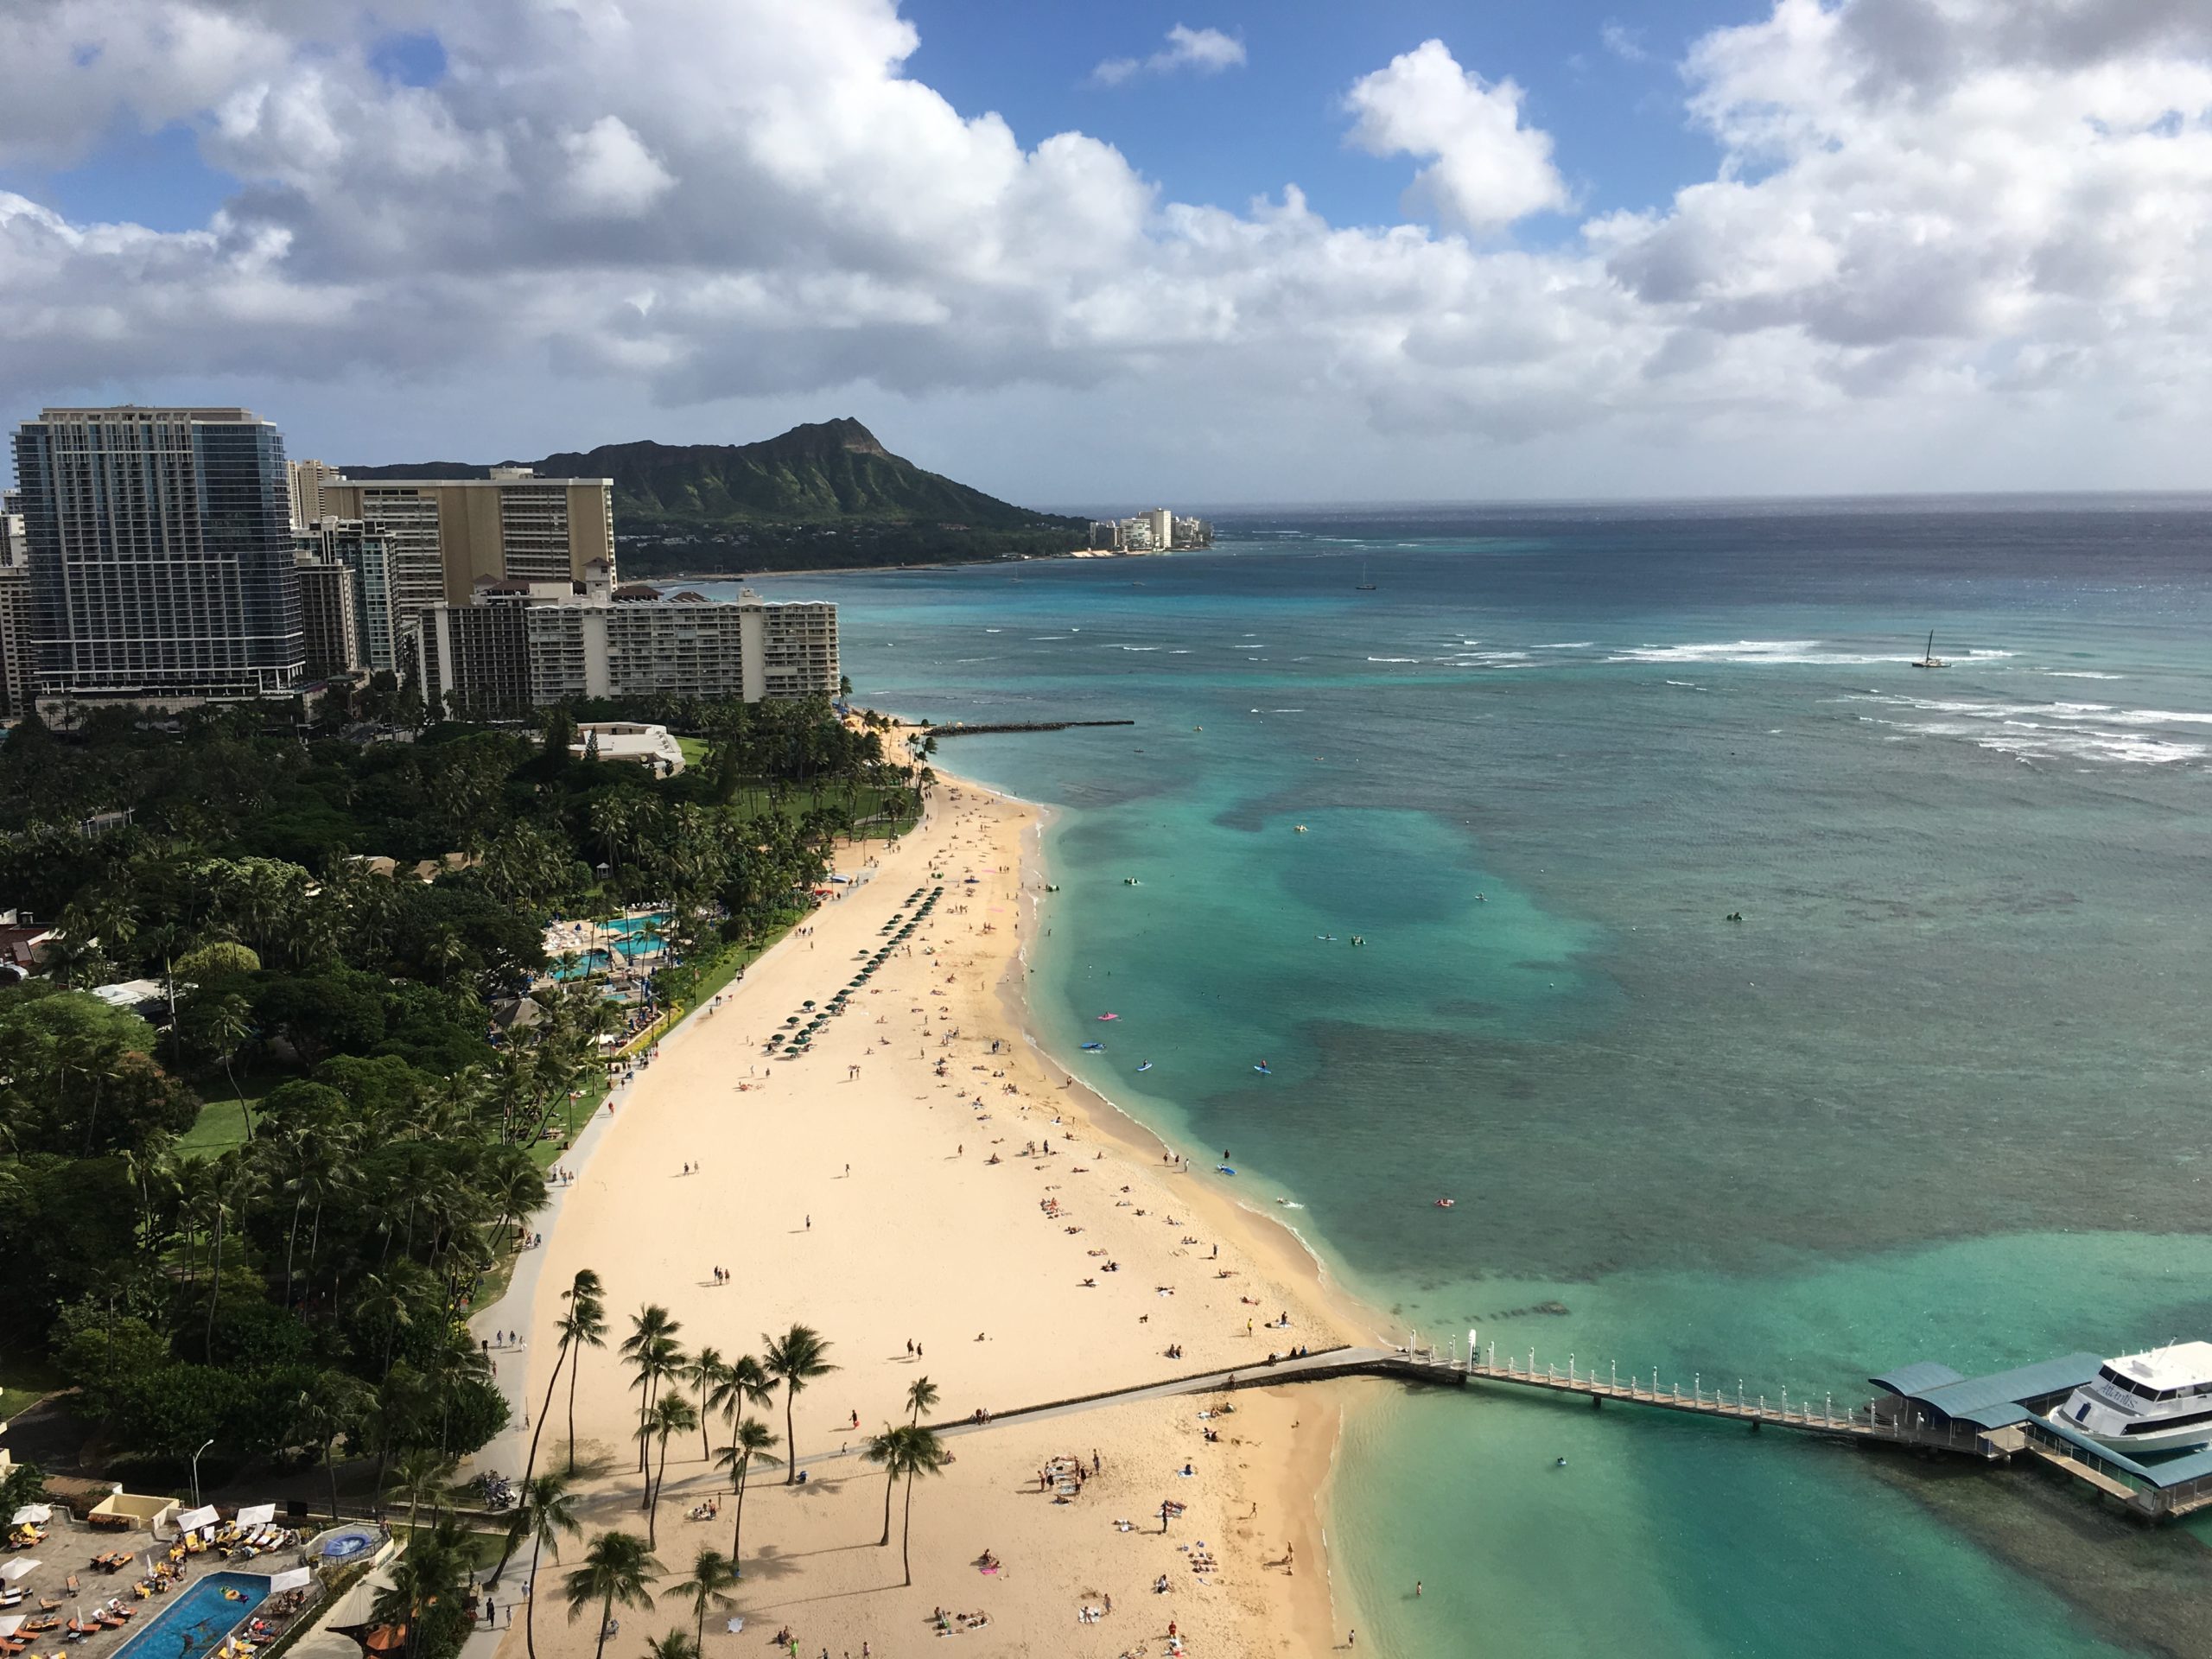 A stay at the Hilton Hawaiian Village in Oahu - The Points Guy